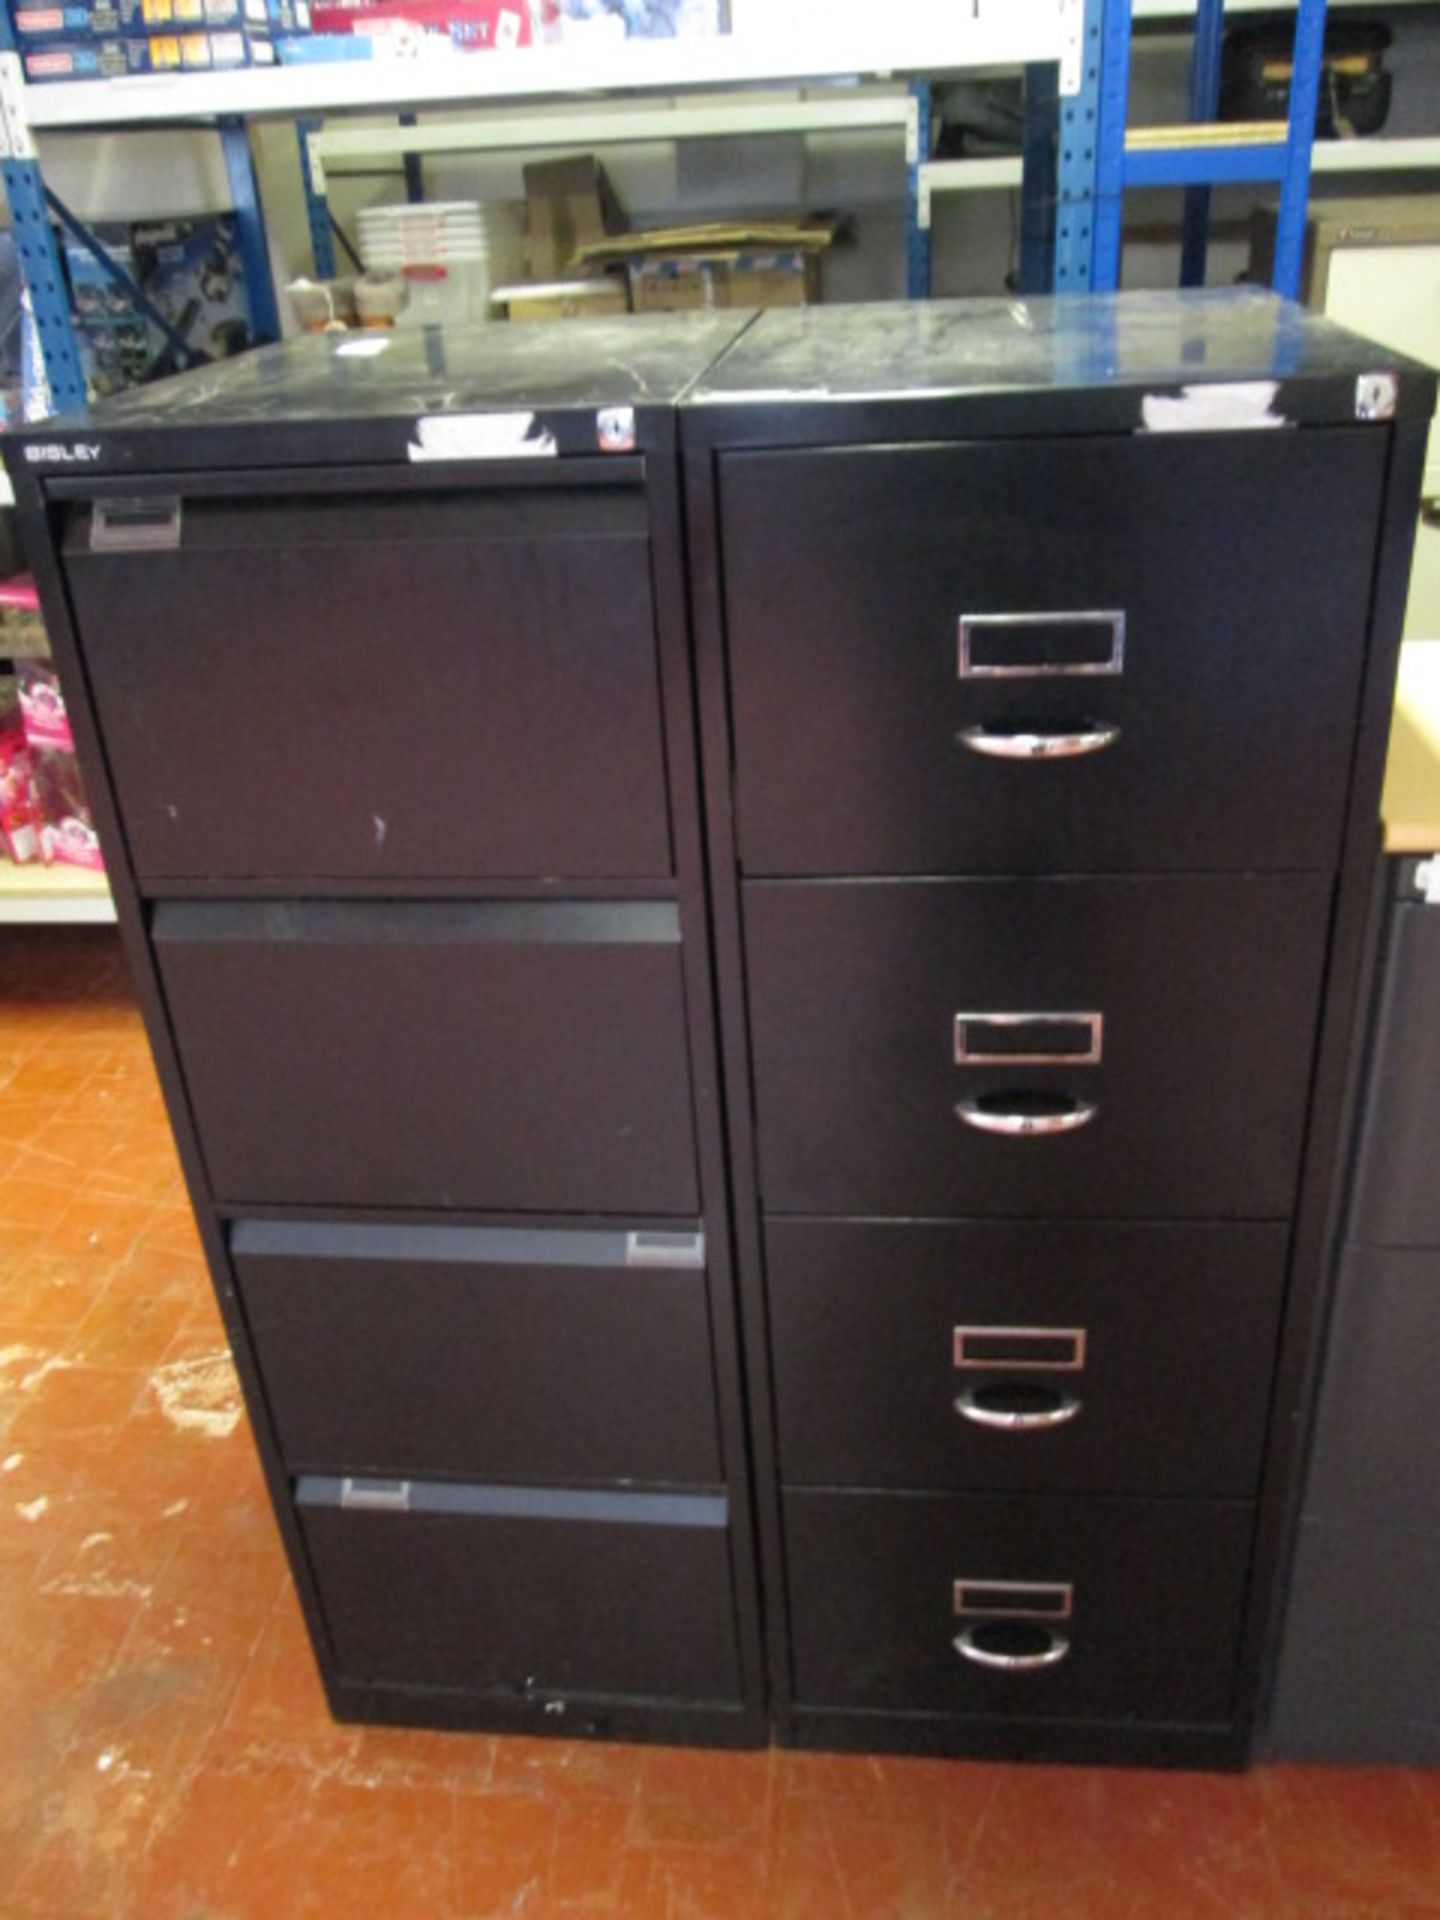 2 x 4 Draw Filing Cabinets in Black, 52" High (1 Bisley)